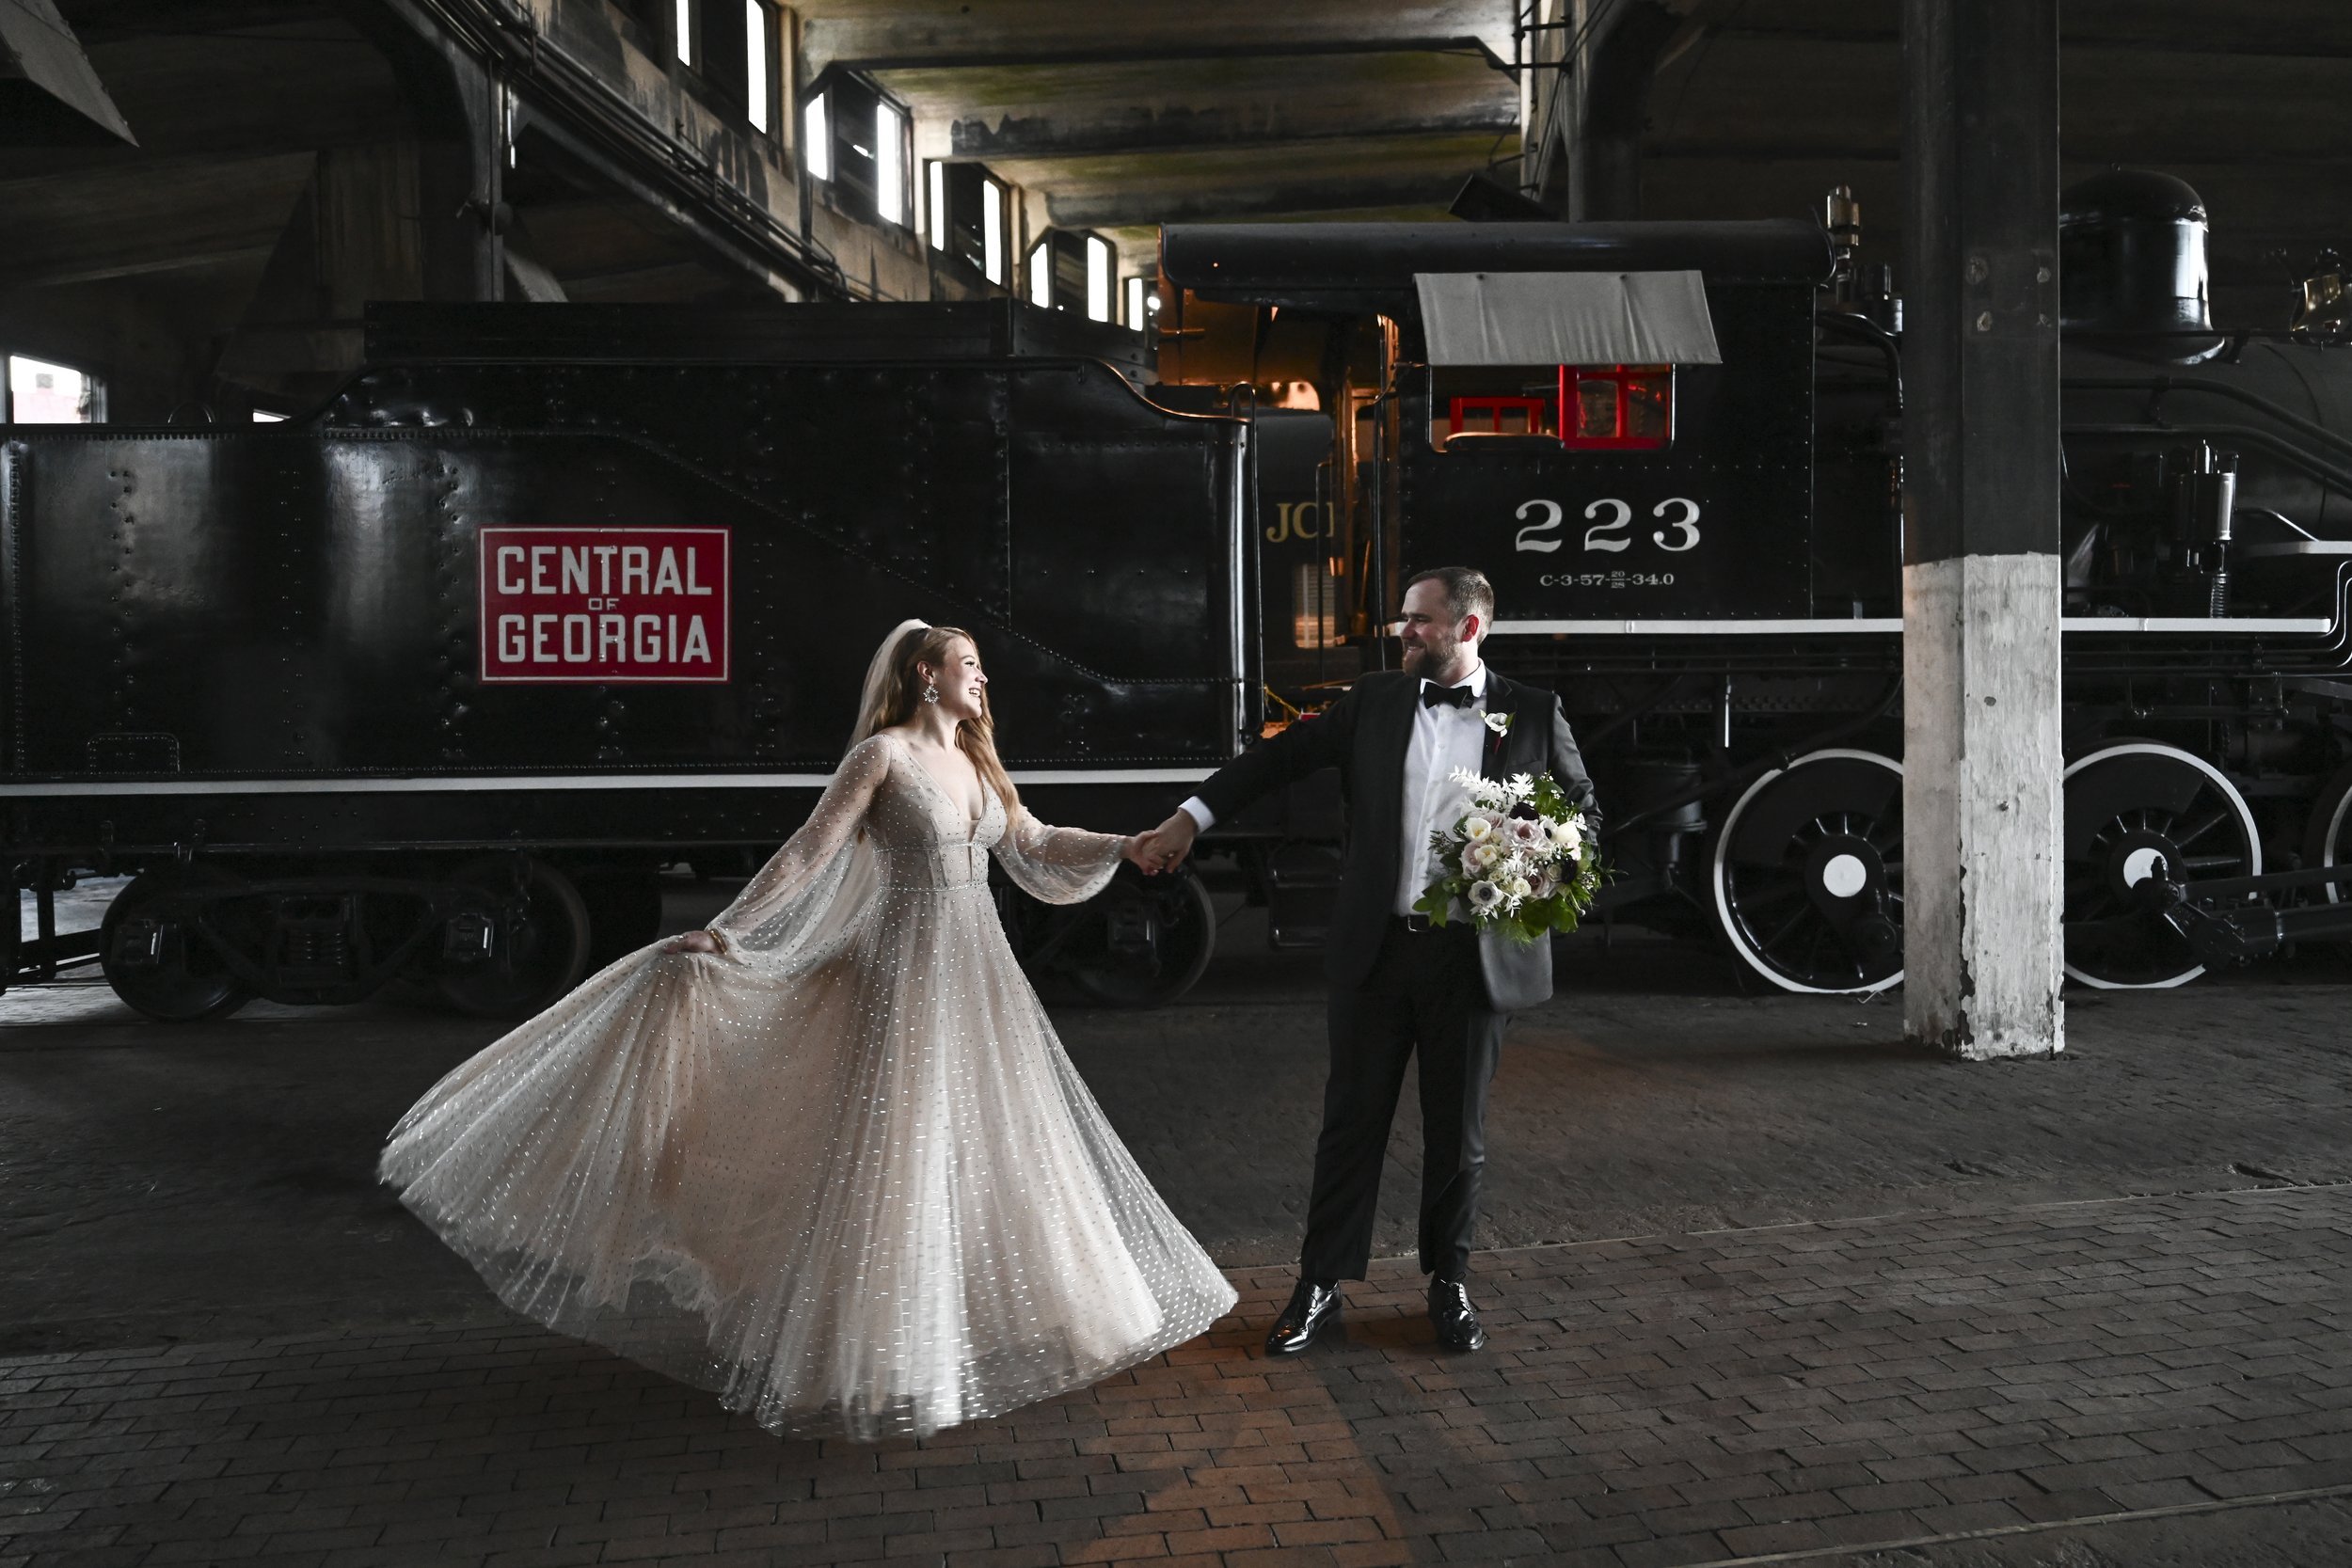 mckenna-and-isaacs-romantic-vintage-inspired-savannah-wedding-at-the-georgia-state-railroad-museum-planned-by-savannah-wedding-planner-ivory-and-beau-savannah-wedding-coordinator-georgia-wedding-planner-destination-wedding-planner-17.JPG